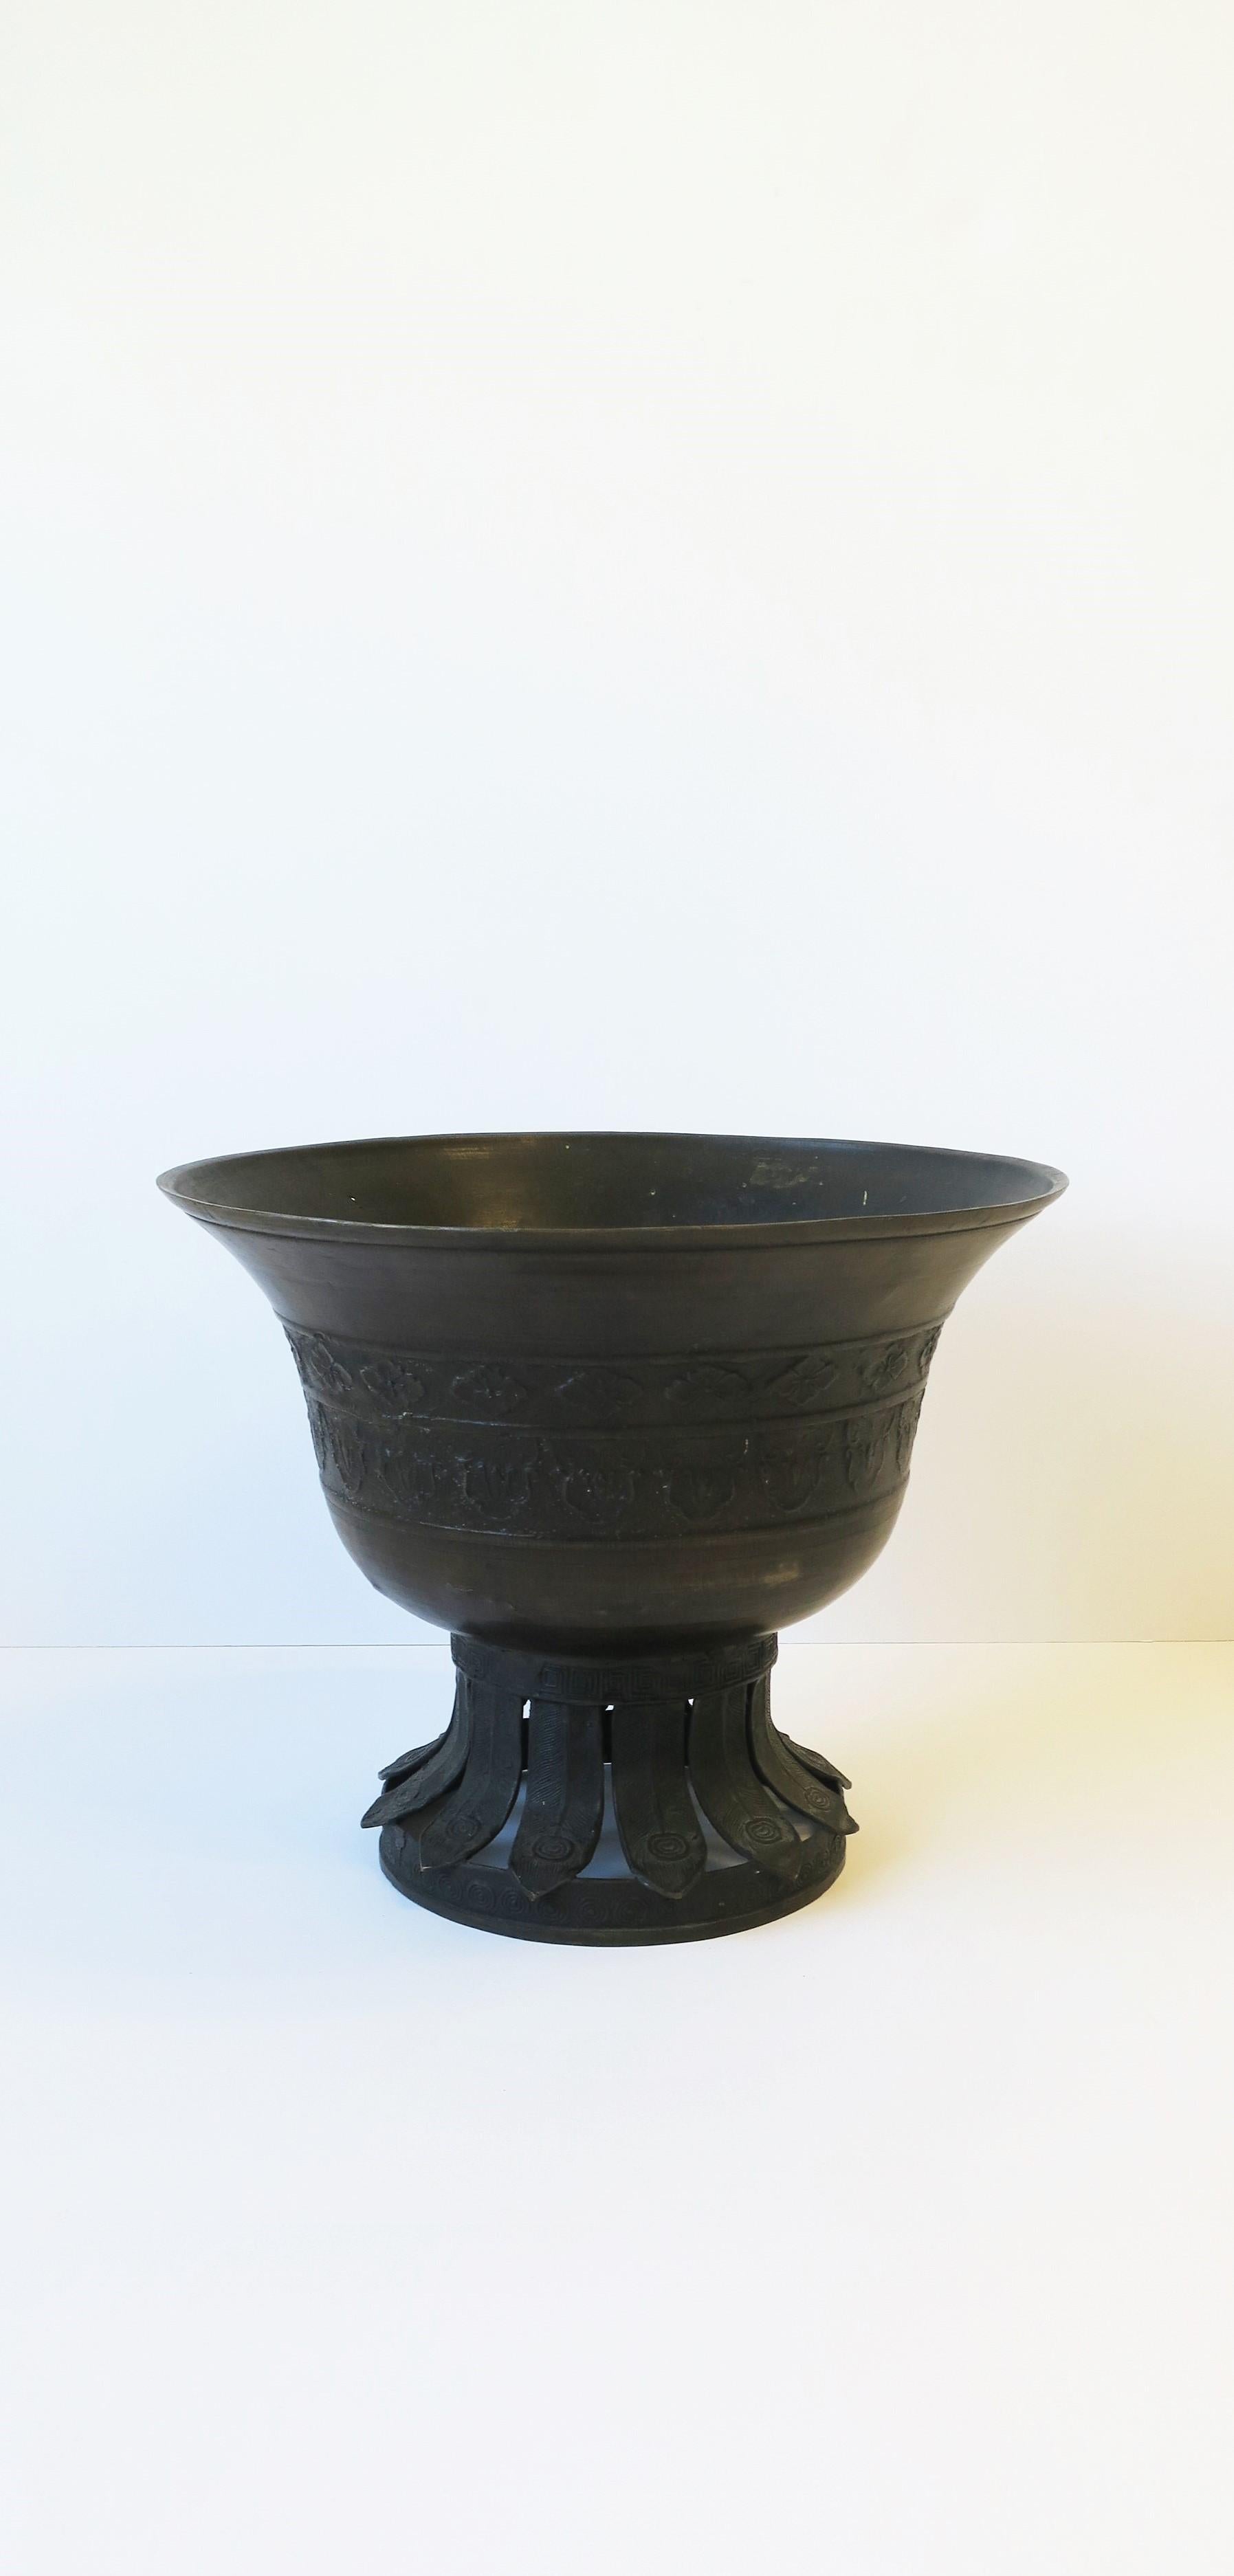 A bronze Jardinière Cachepot with beautiful decorative base, circa 20th century. Beautiful as a standalone piece or as an overpot for flowers or plant. Shown with tulip flowers in image #4 and 5 (pot can handle larger/more plant/flower than what is